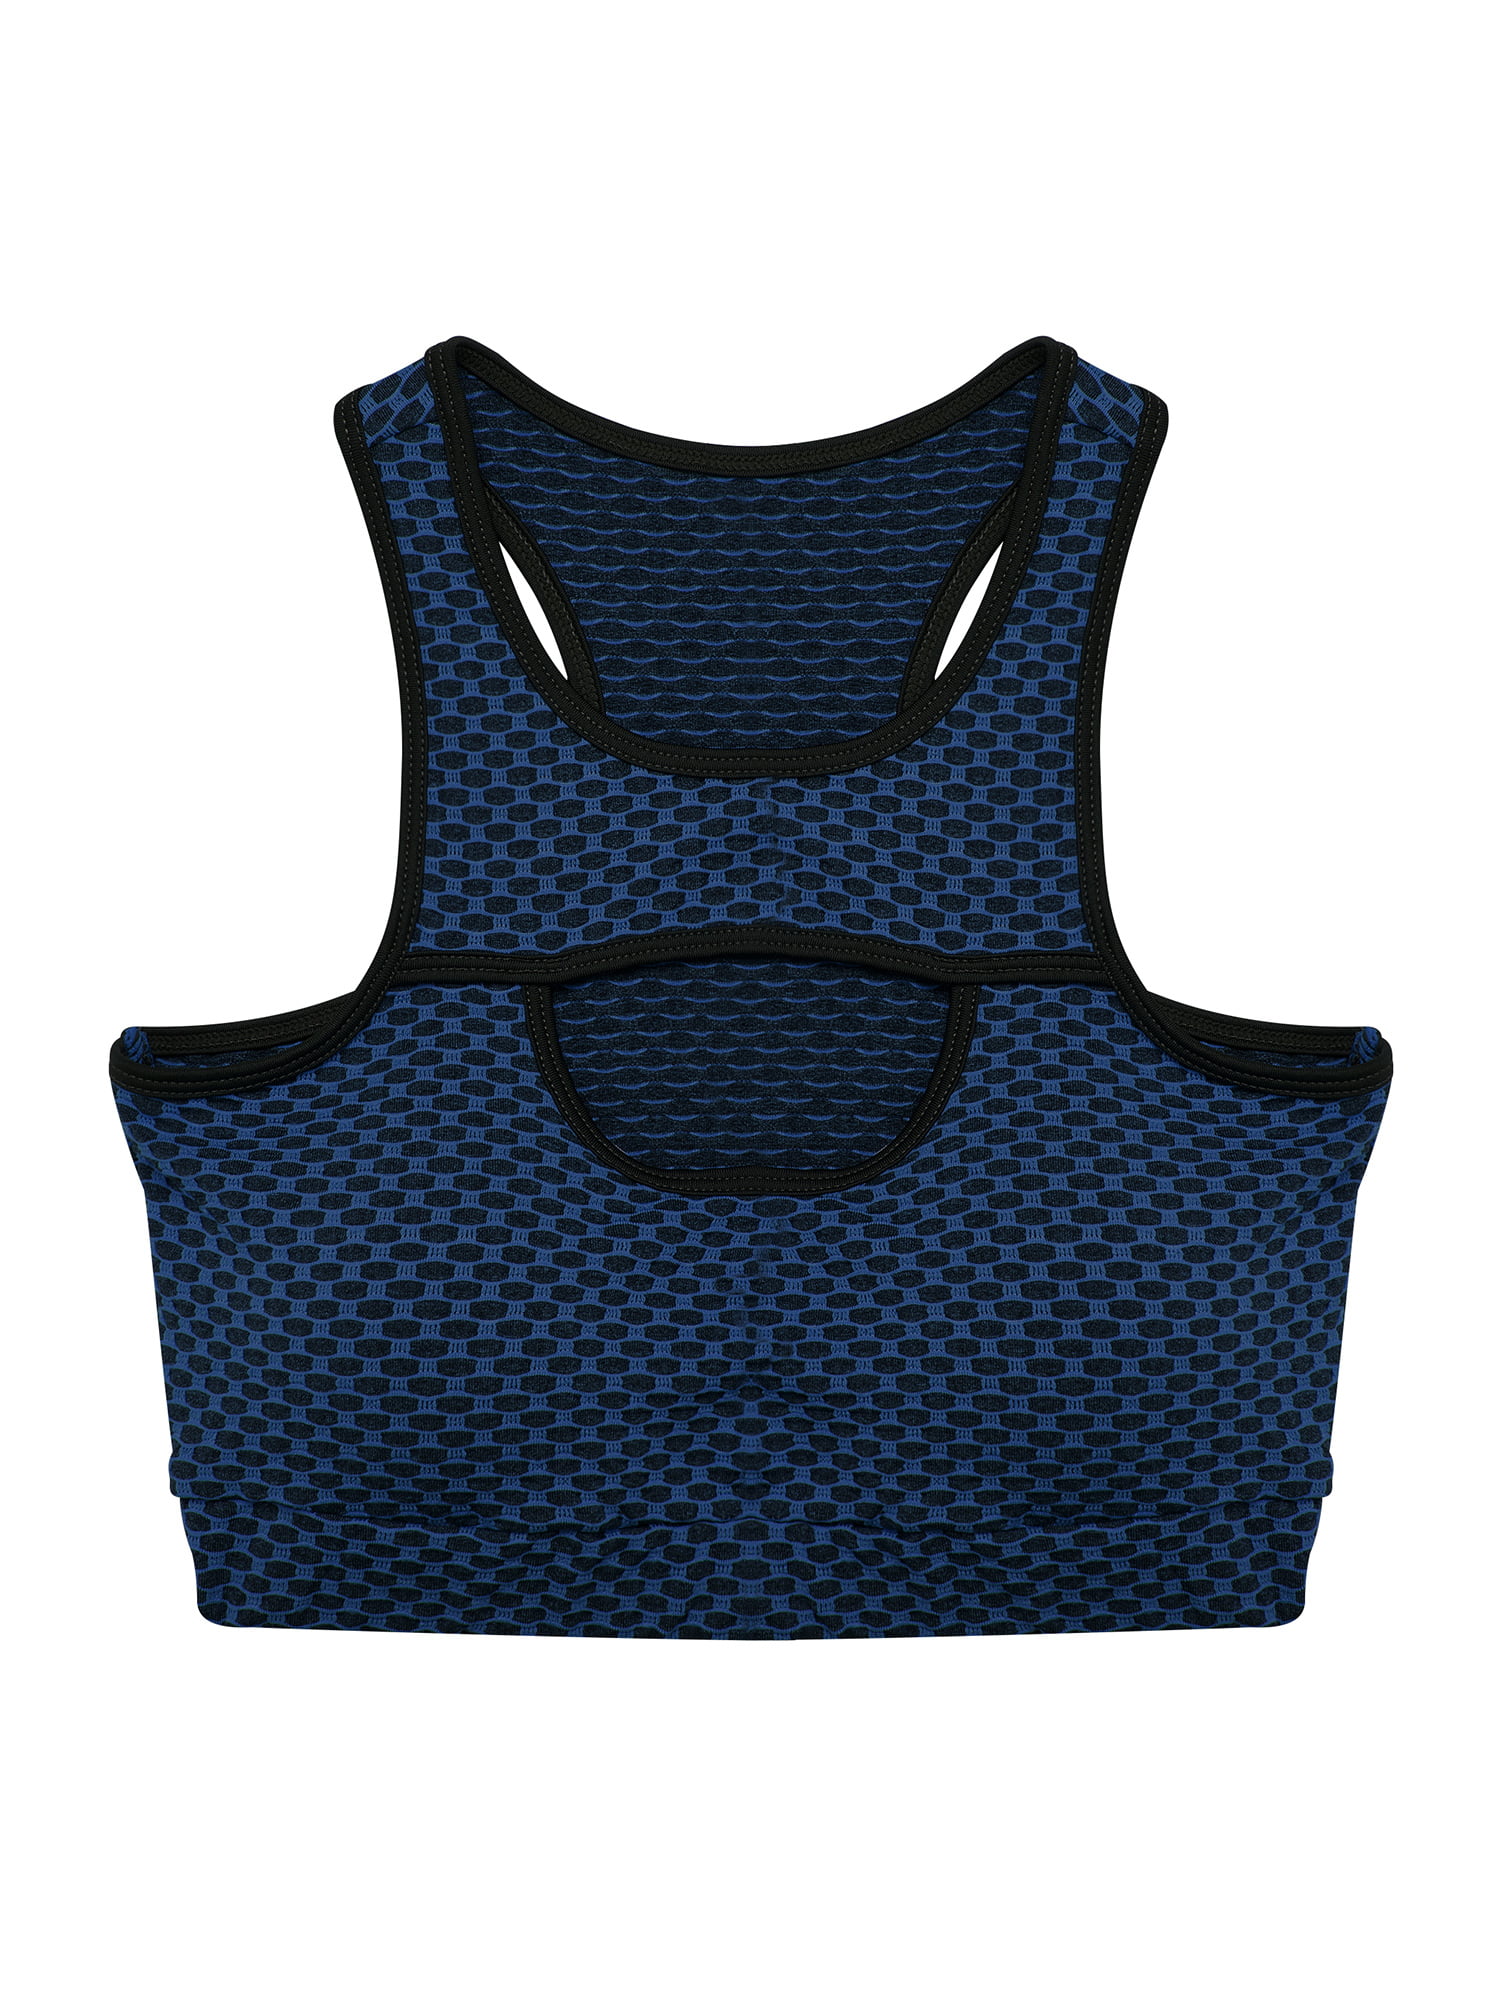 FOCUSSEXY Sports Bra for Women, Sexy Cutout Crop Workout Tops for